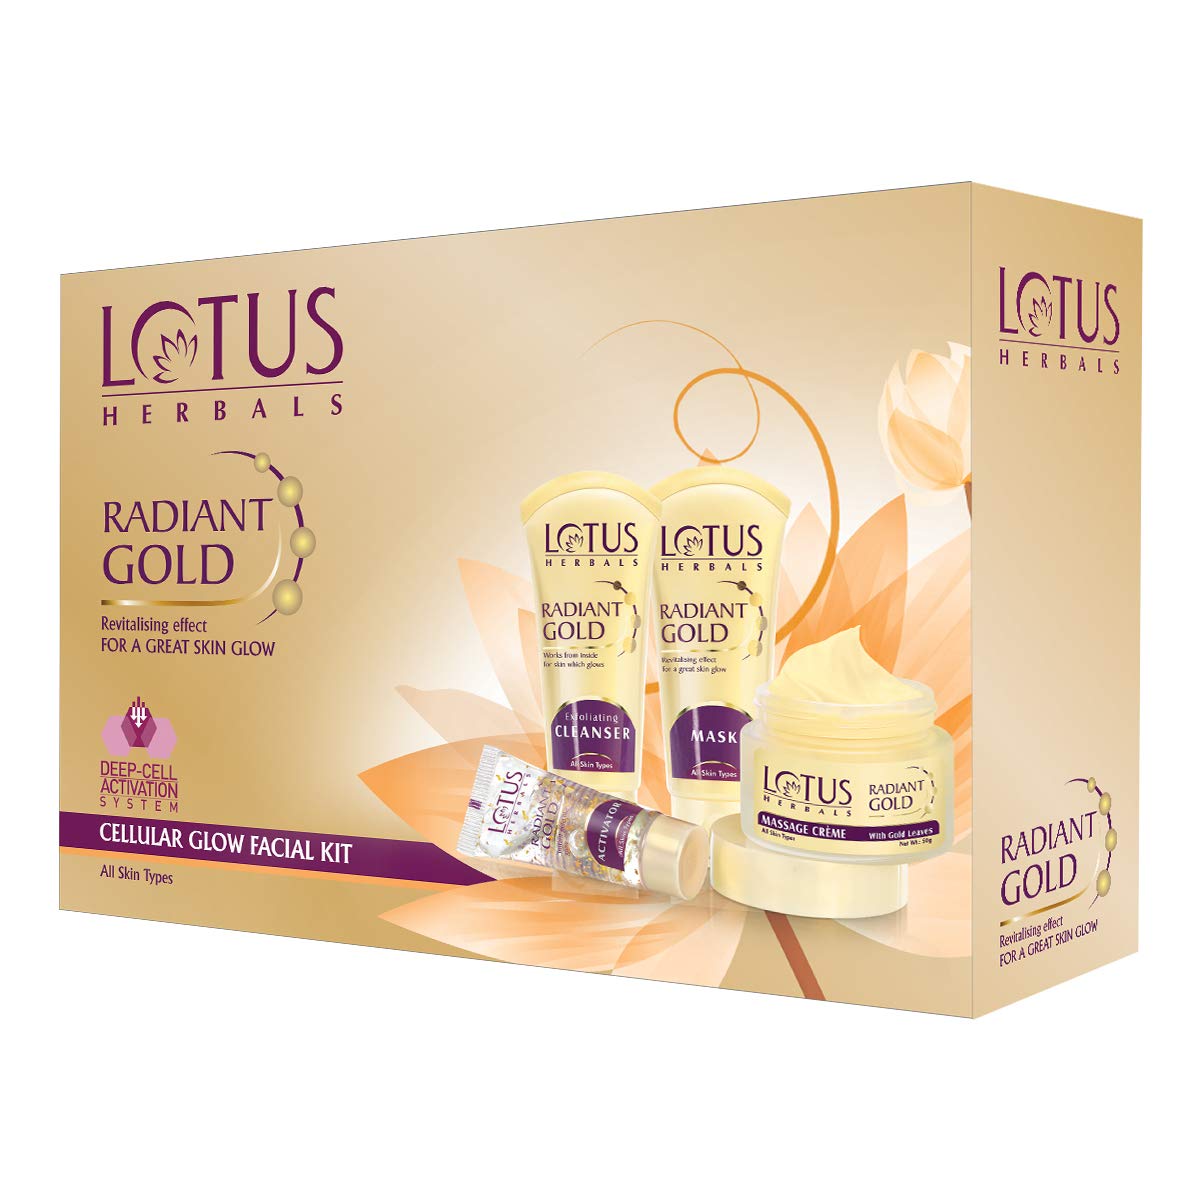 Lotus Herbals Radiant Gold Facial Kit for instant glow with 24K Pure Gold & Papaya - 170 g